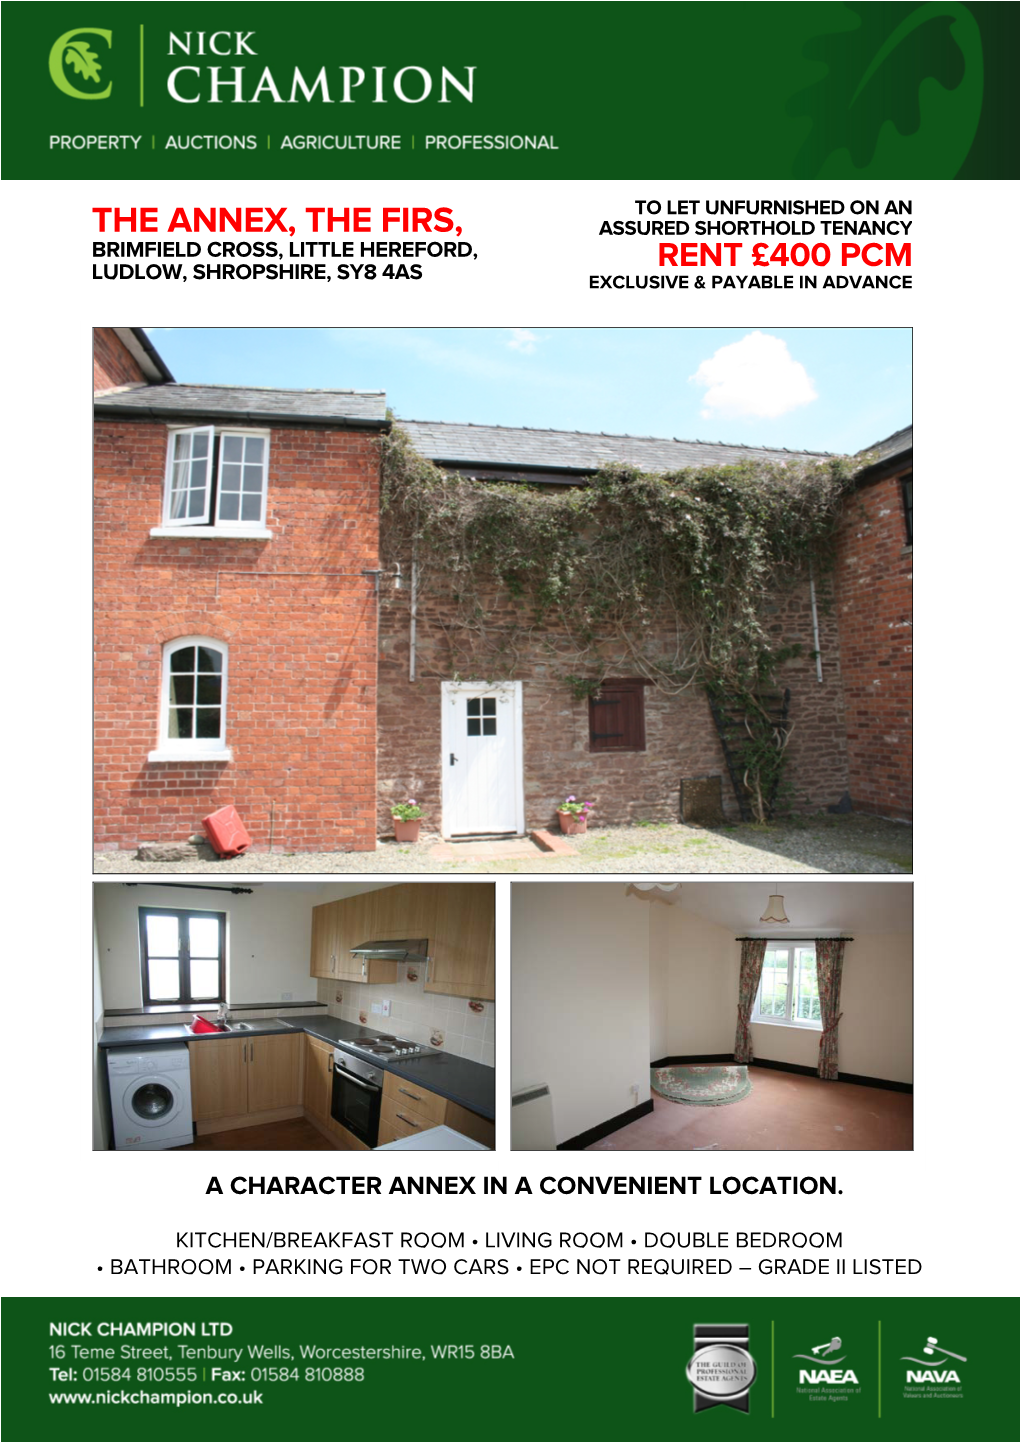 The Annex, the Firs, Assured Shorthold Tenancy Brimfield Cross, Little Hereford, Rent £400 Pcm Ludlow, Shropshire, Sy8 4As Exclusive & Payable in Advance